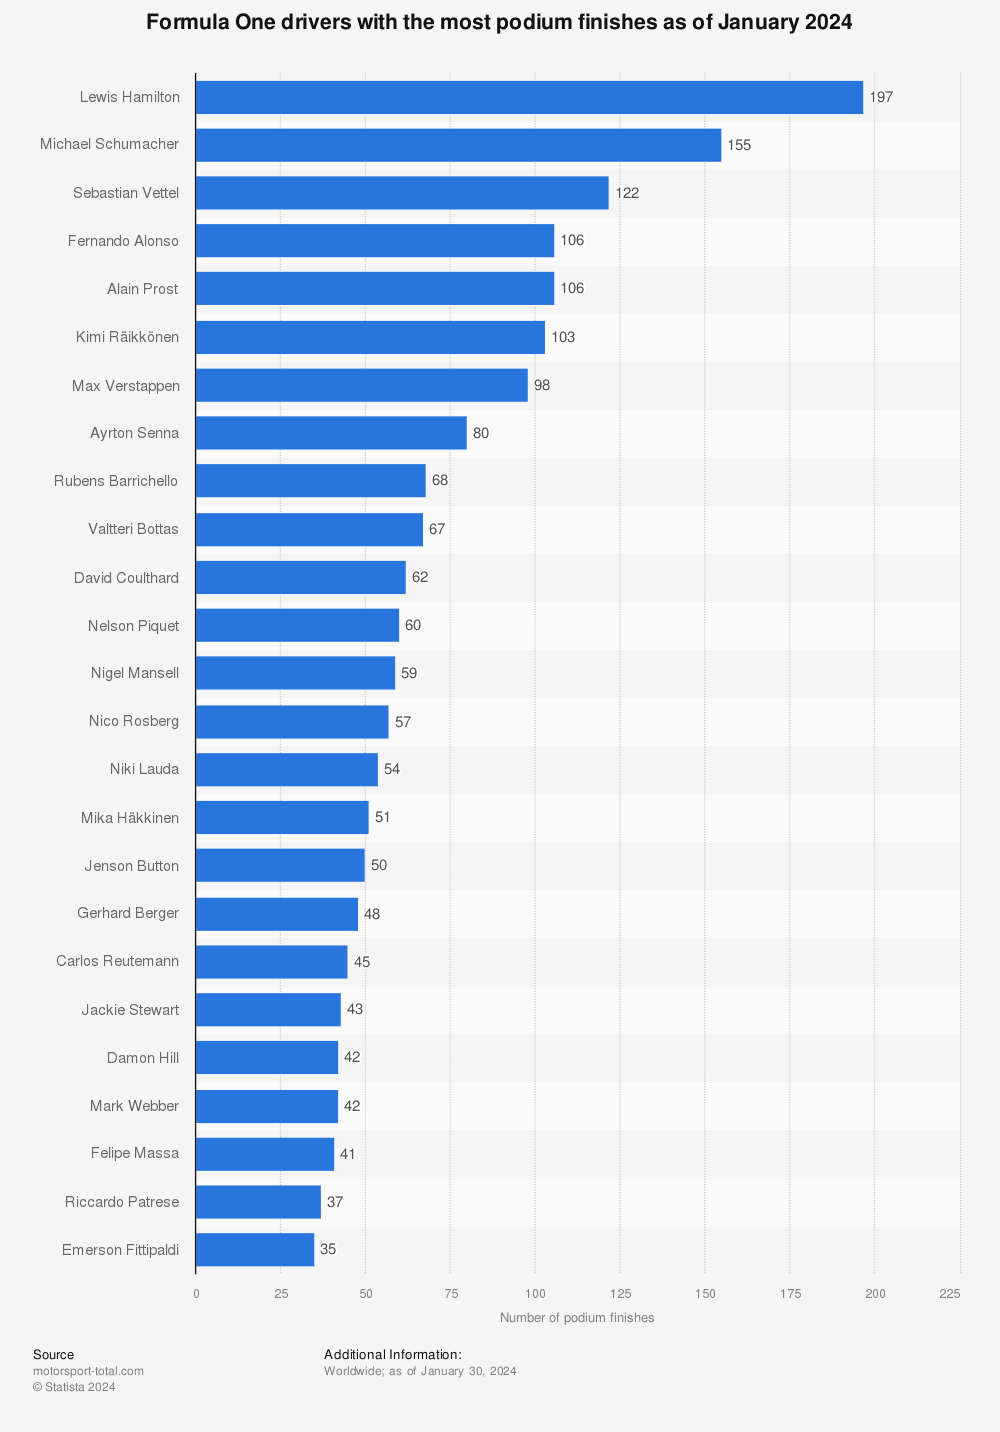 Statistic: Top 50 Formula 1 drivers based on number of podium finishes from 1950 to 2014 | Statista